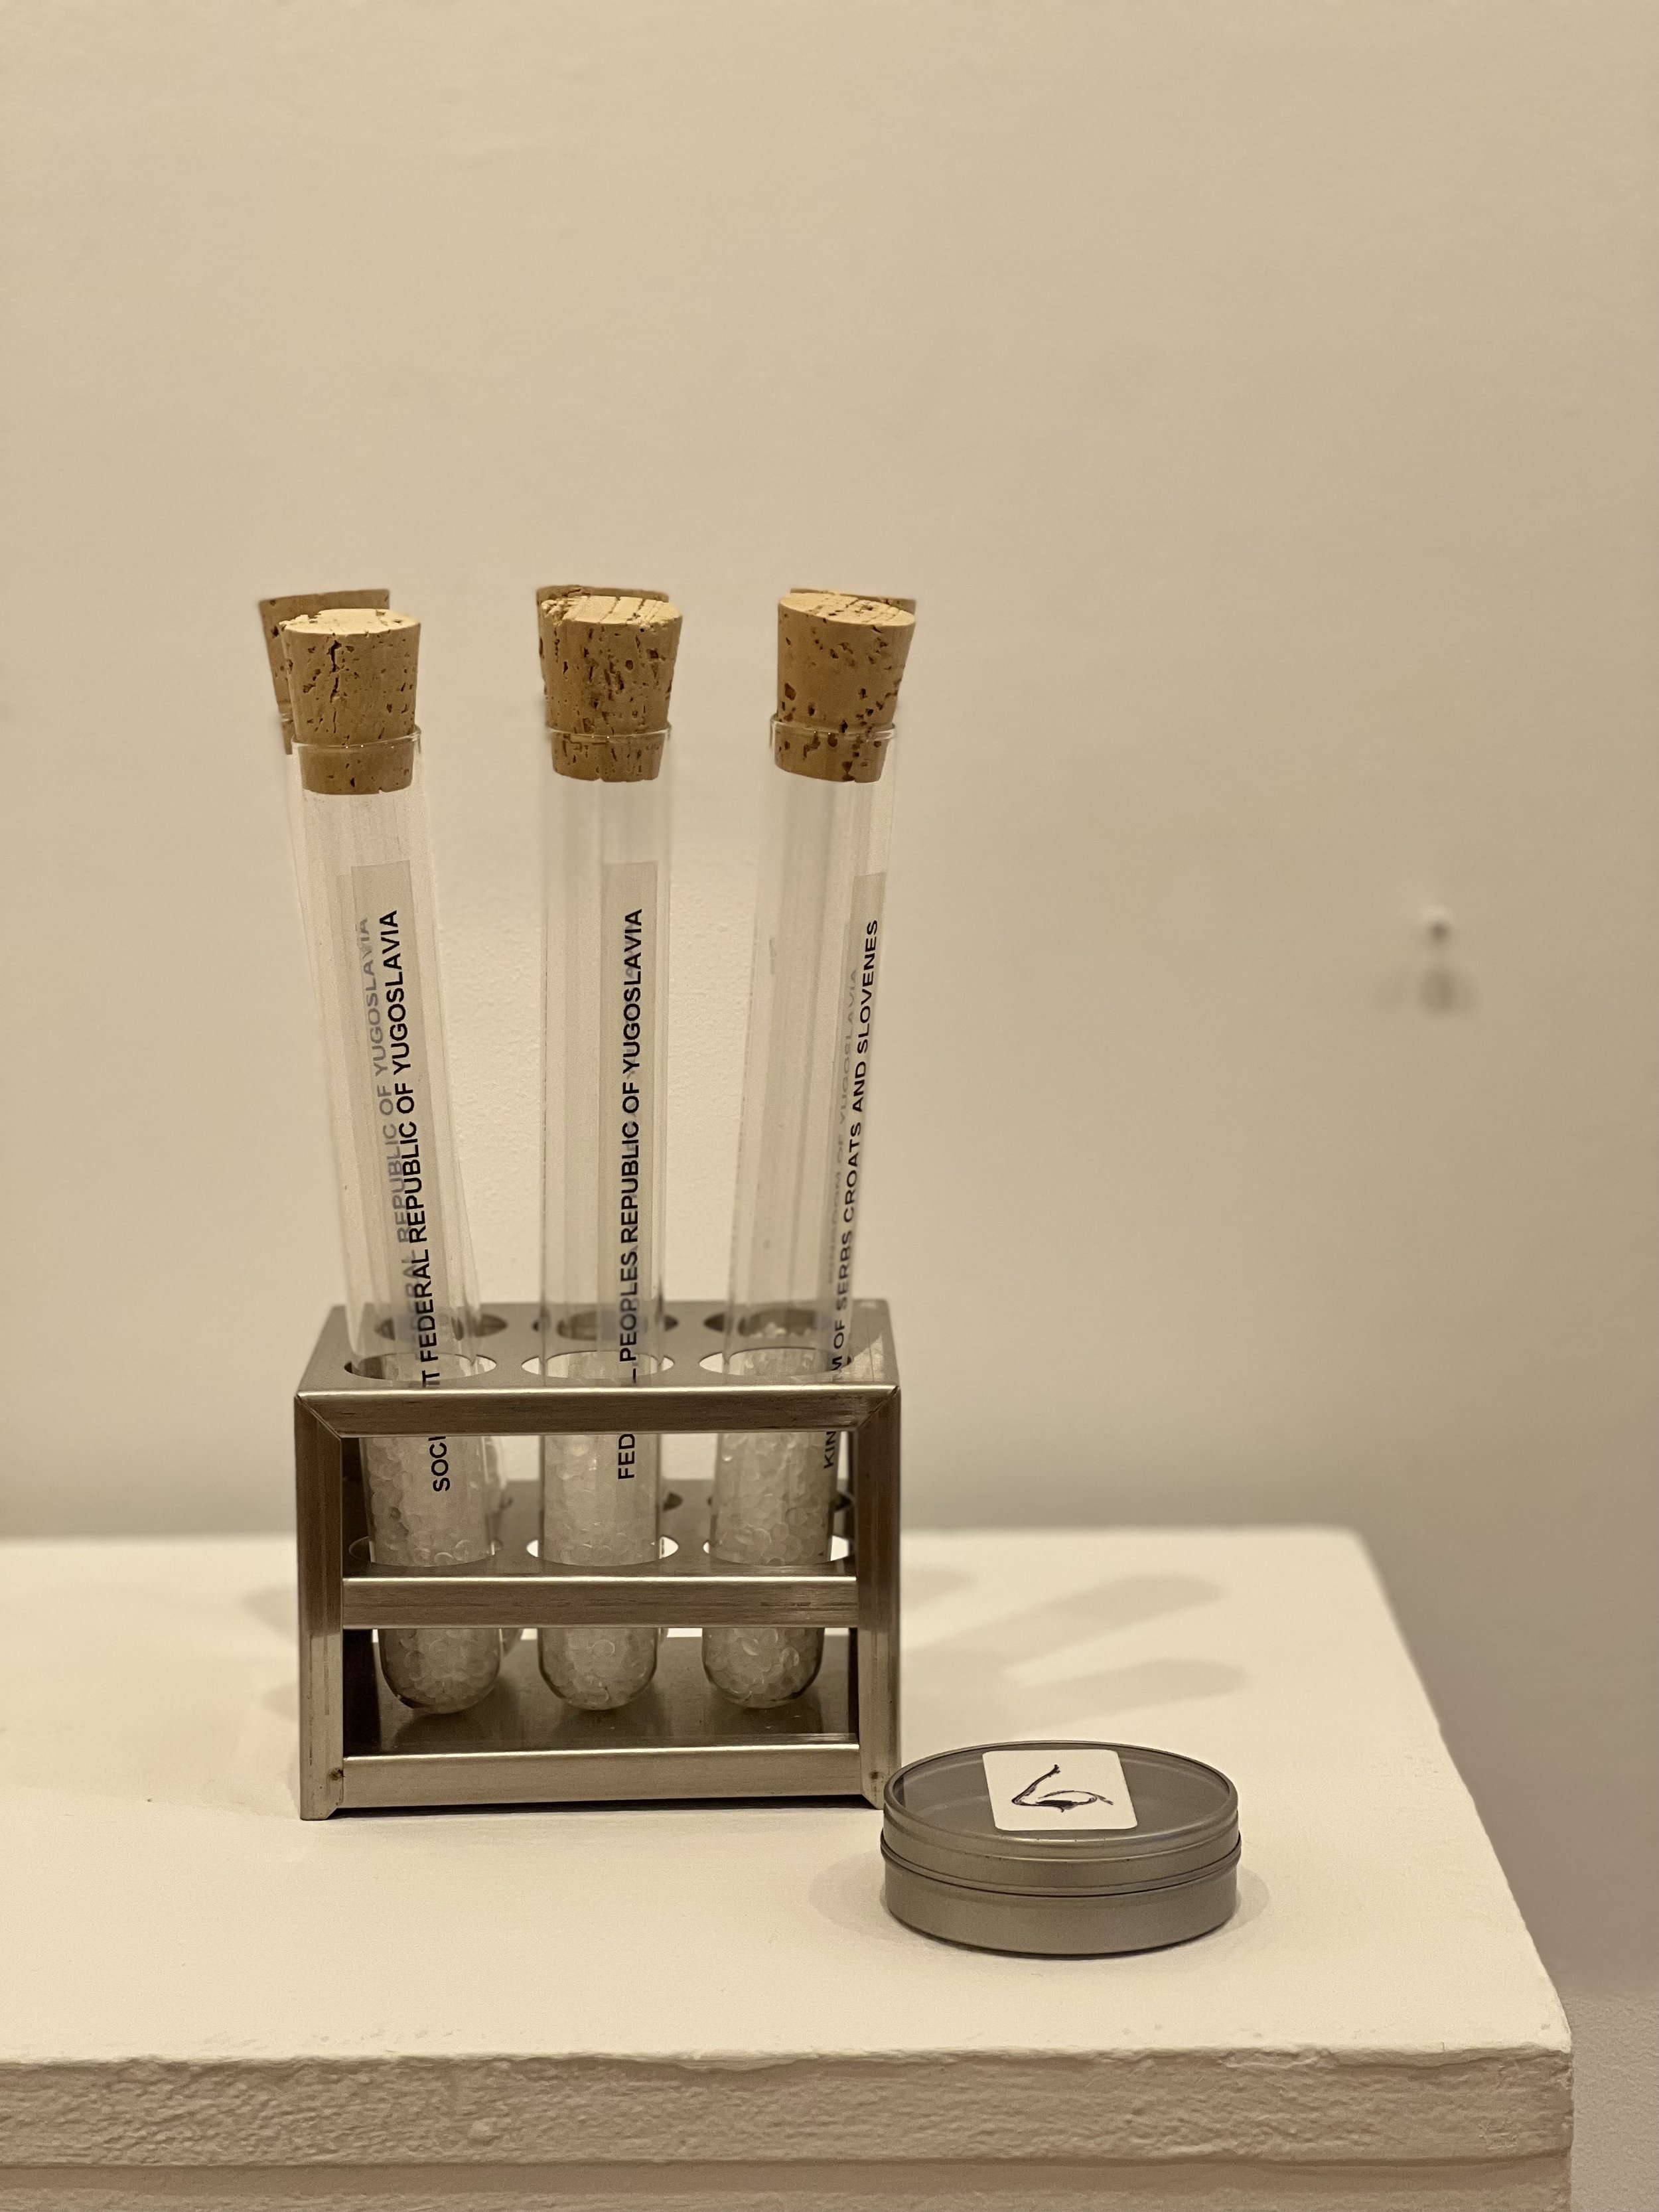   Scents for Forgotten Countries , 2022  Glass test tubes, cork stoppers, stainless steel rack, scents  9.5 x 4.5 x 3 inches   $450.   Six clear glass test tubes with corks and displayed on a stainless-steel lab rack.  